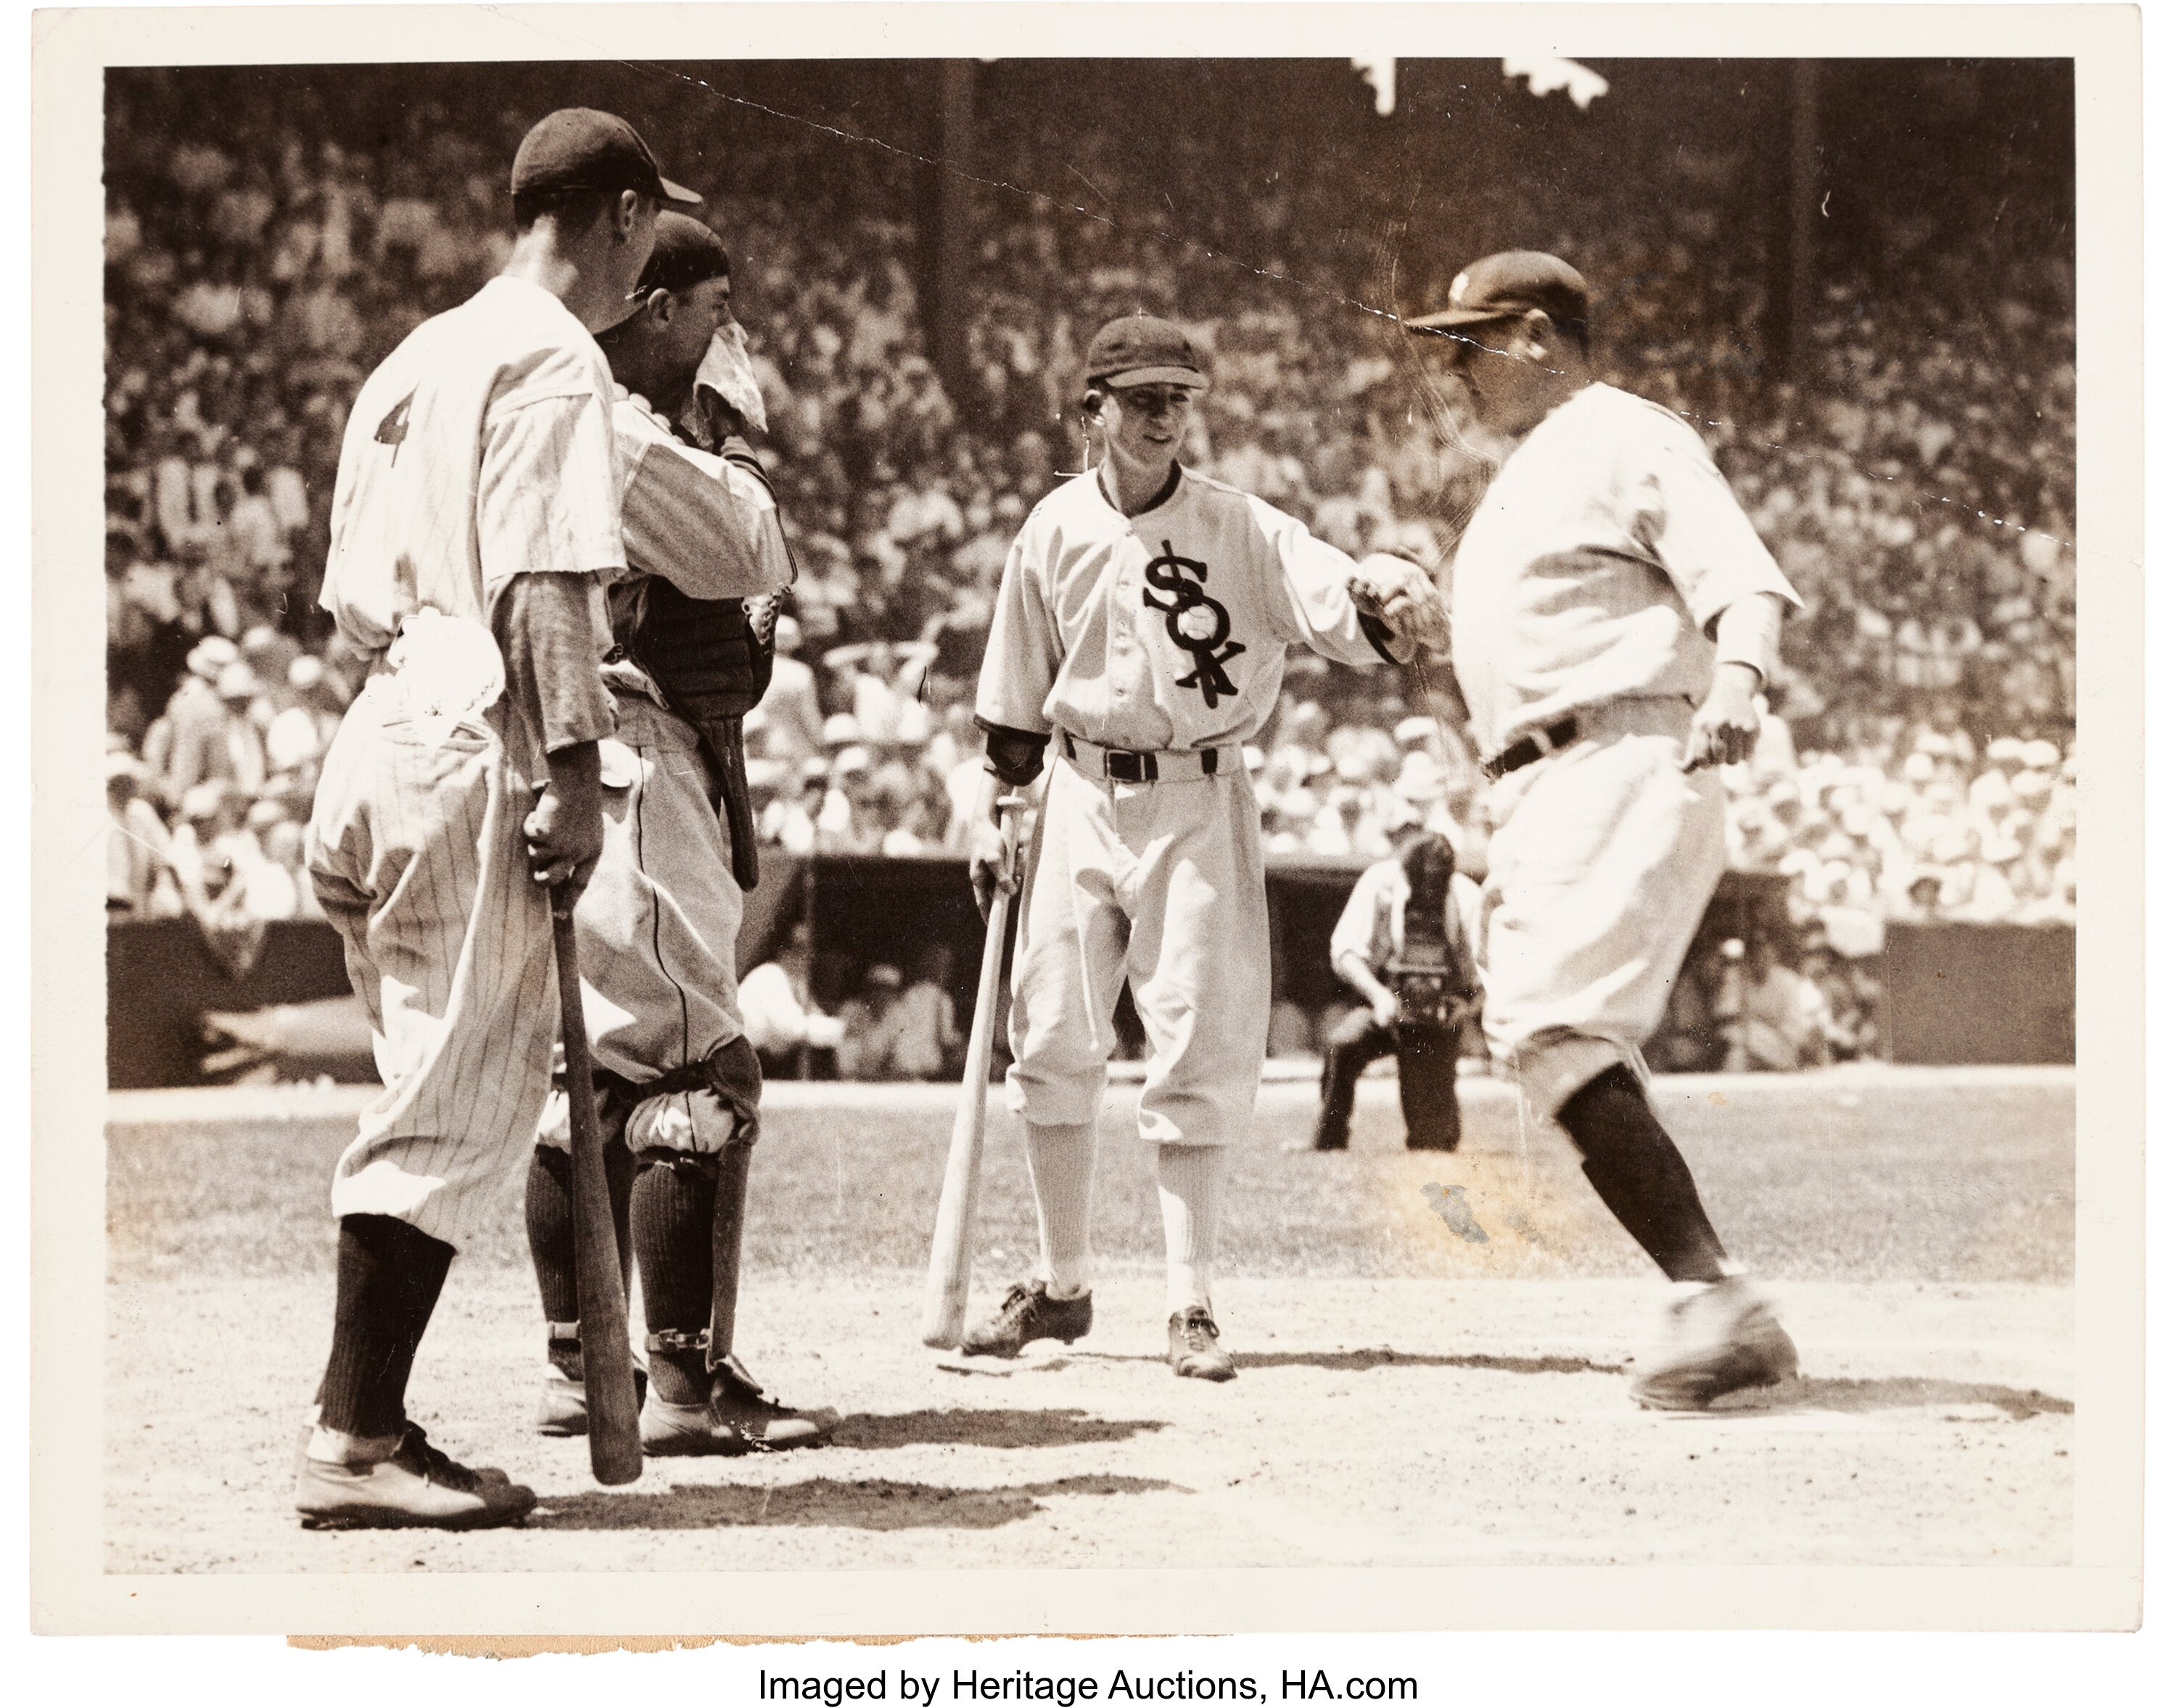 Memory Lane Hosting Pair of Iconic Jerseys at NAtional Convention: Ruth and  Gehrig - Sports Collectors Digest